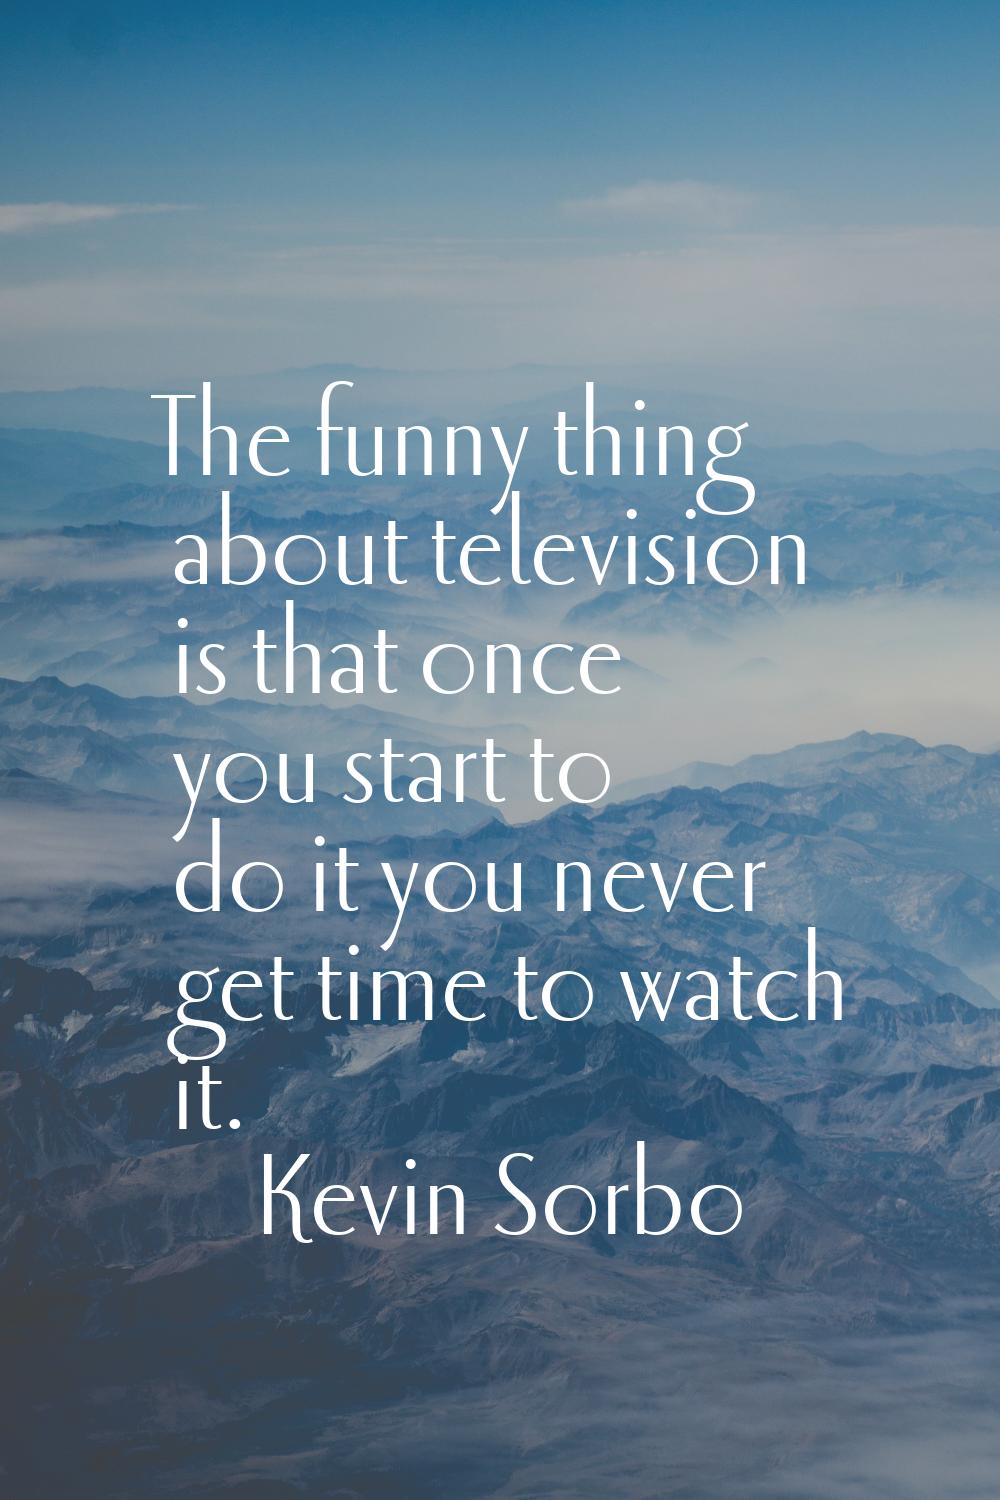 The funny thing about television is that once you start to do it you never get time to watch it.